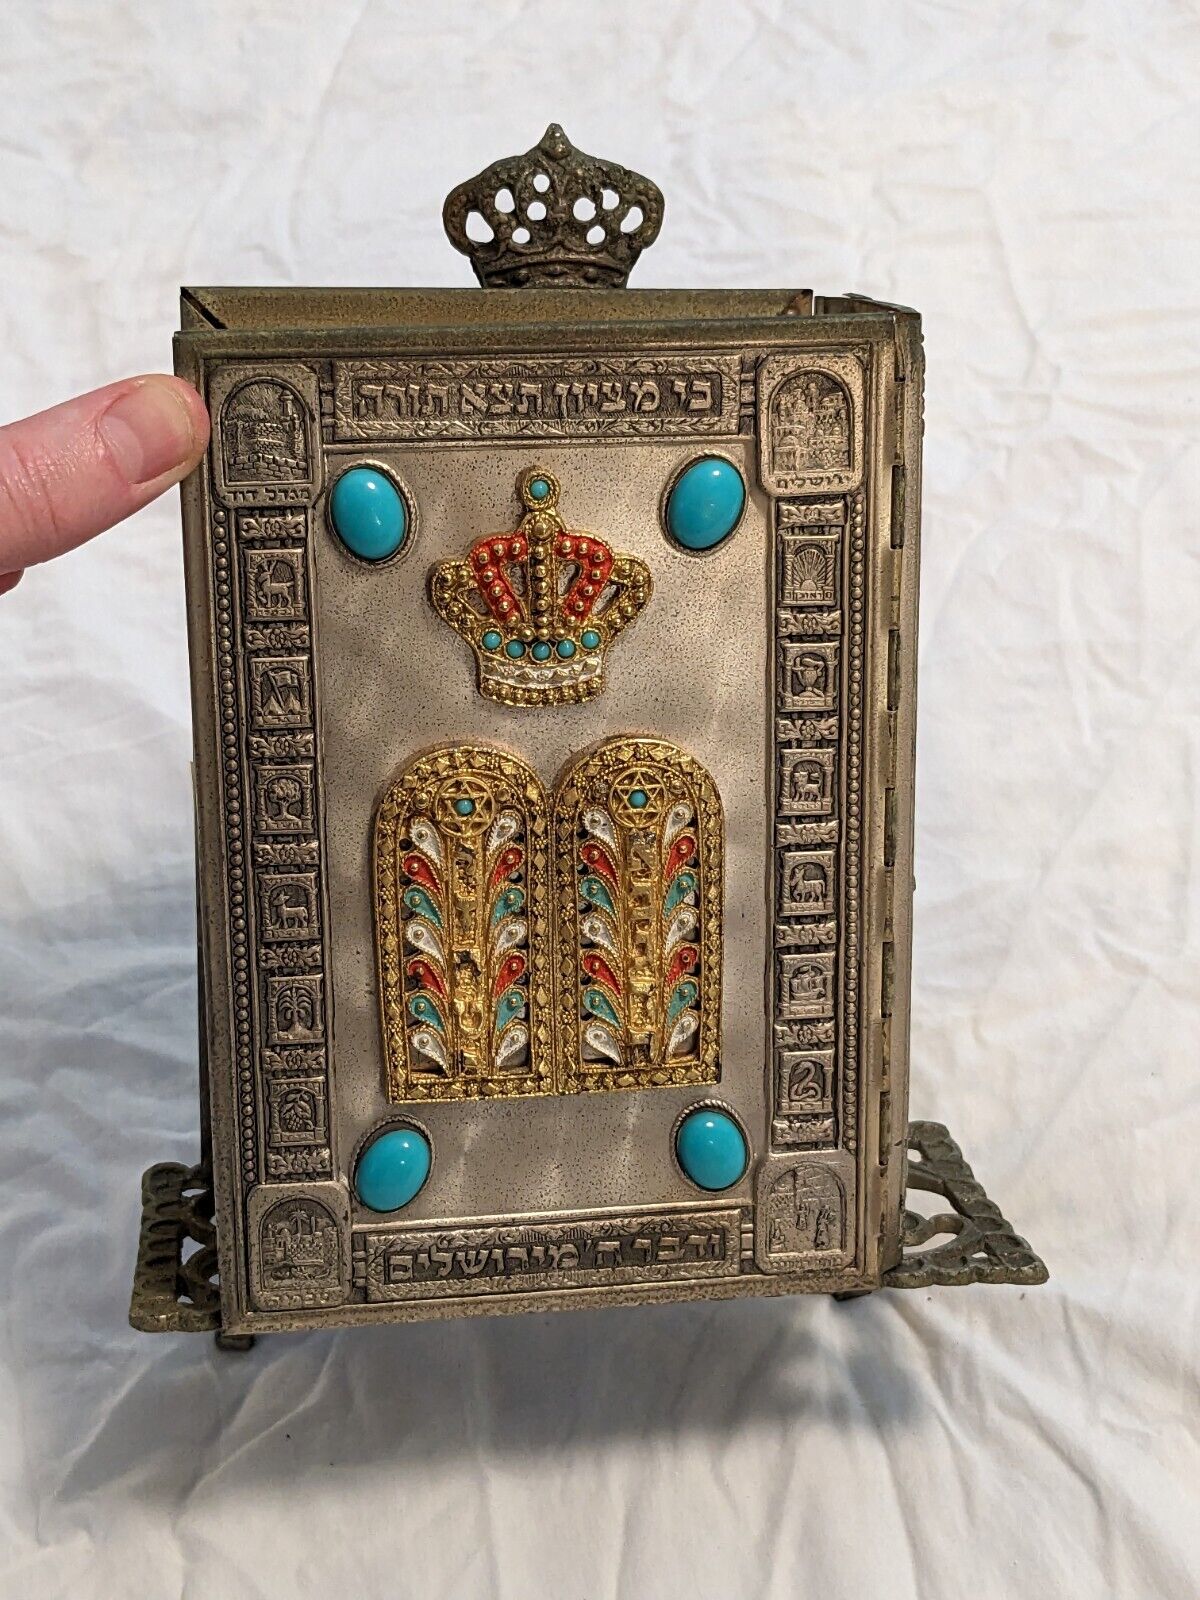 1972 Silver And Turquoise Color Siddur The Holy Scriptures Jewish Bible...